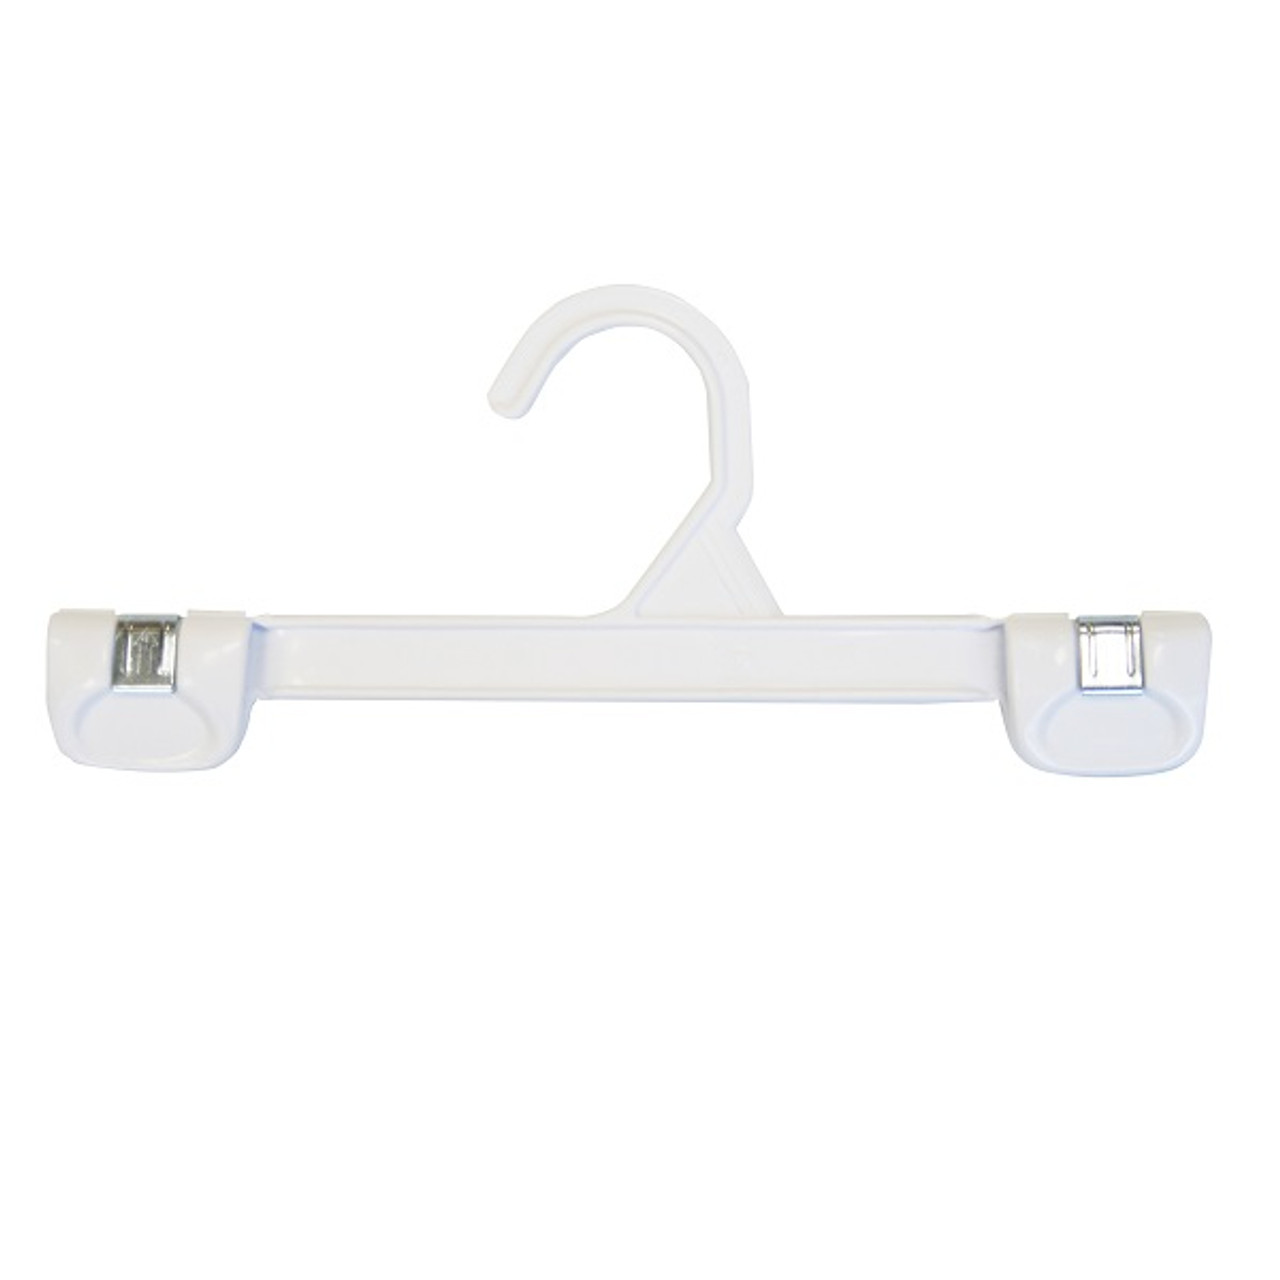 10" White Adult/Youth Skirt or Pant Hanger with Plastic Hook per 100